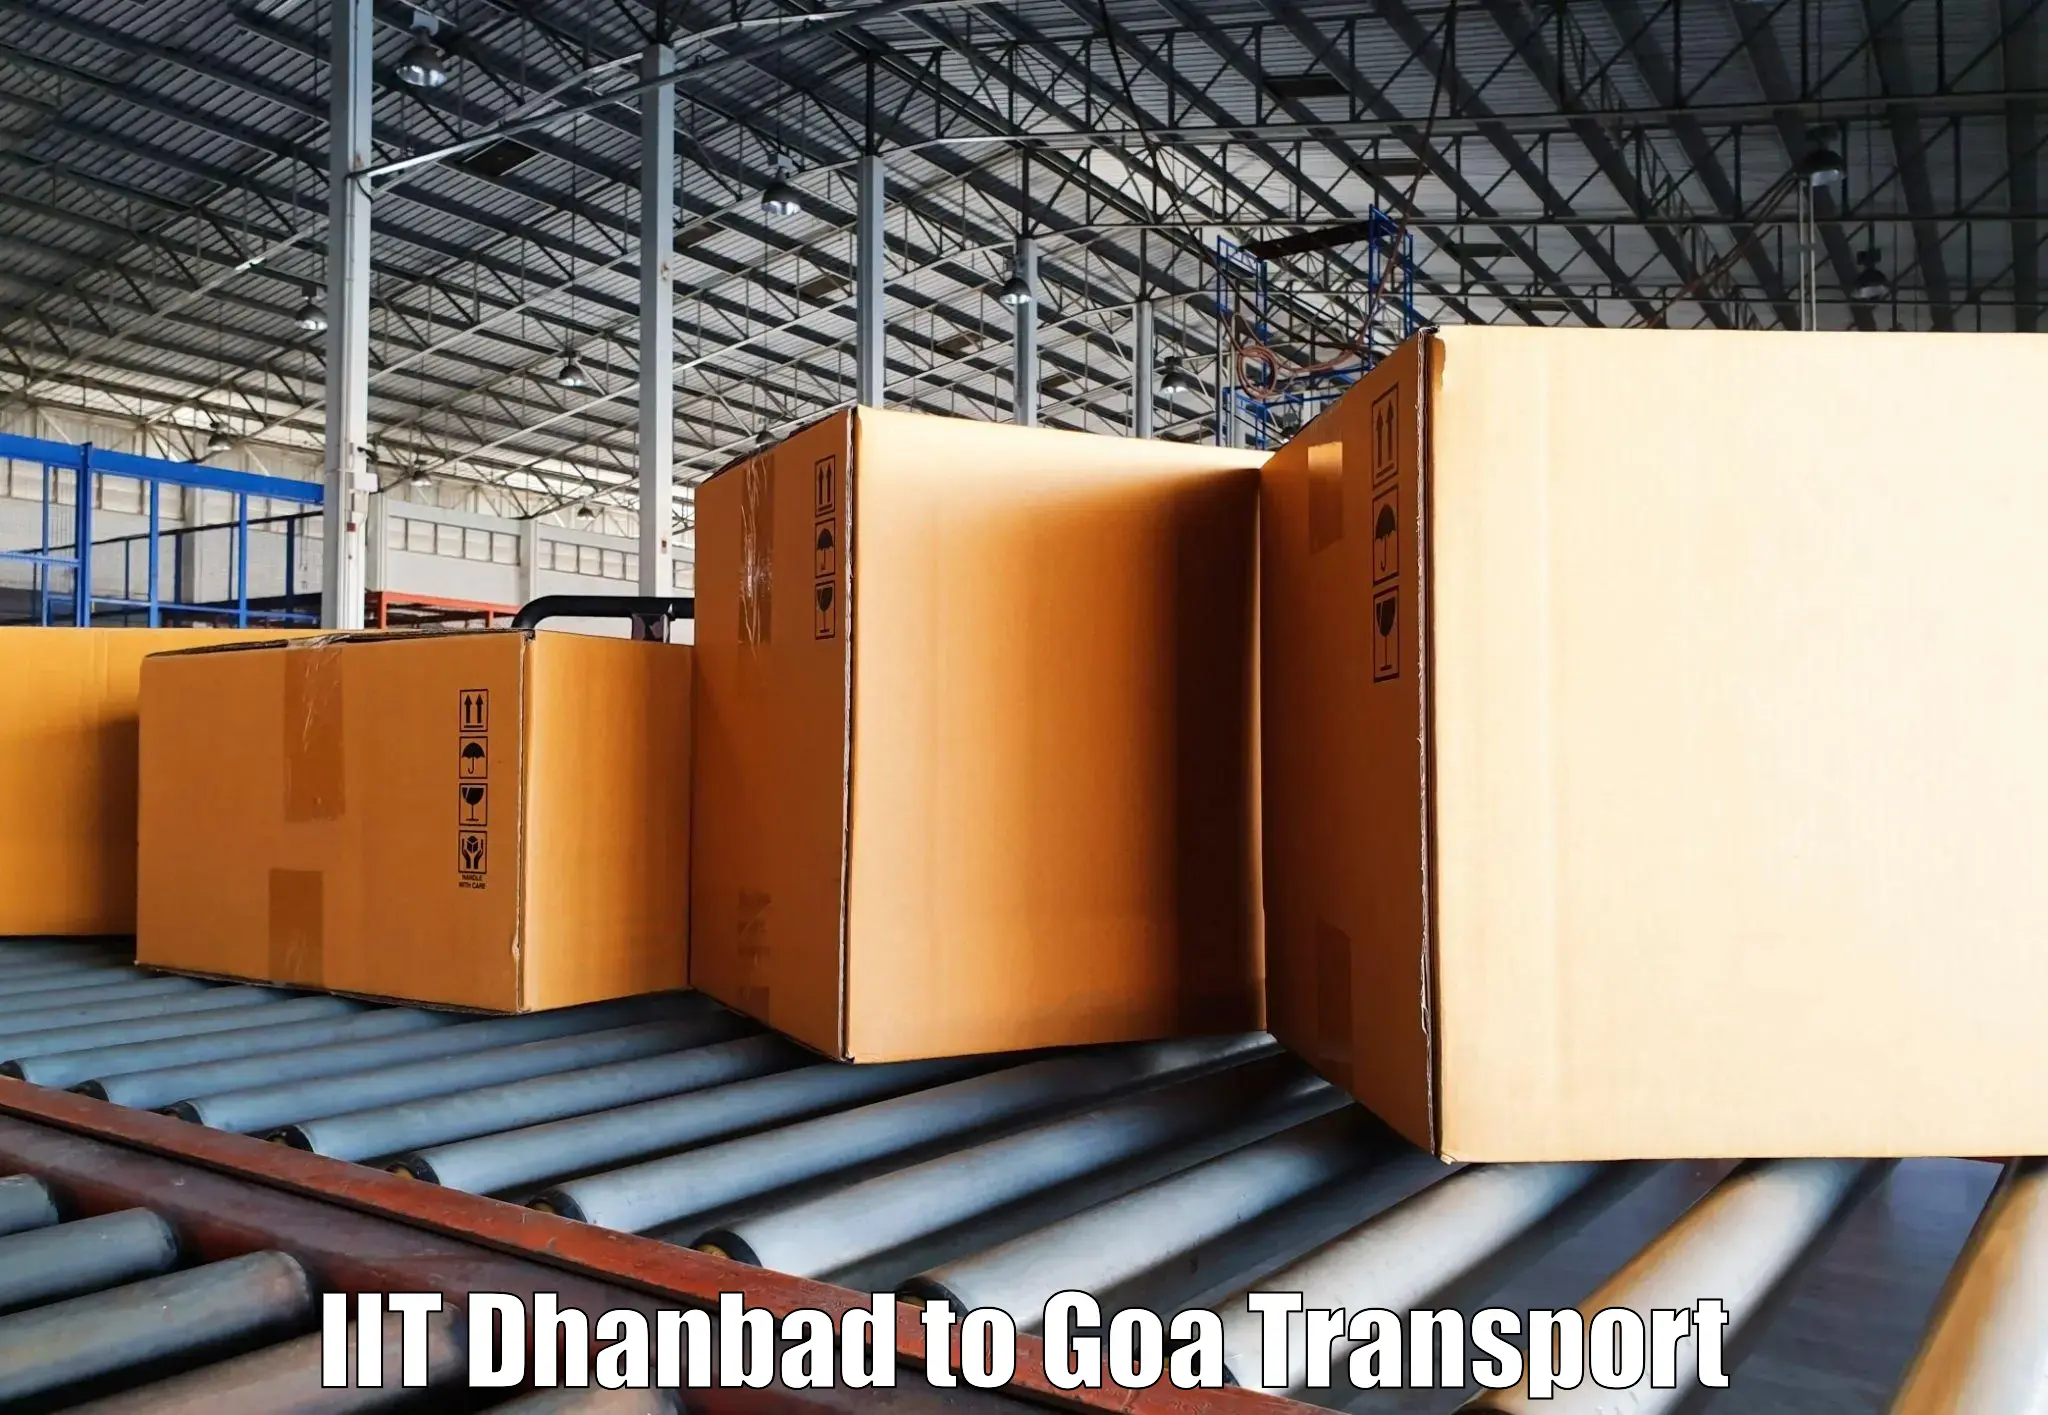 Daily transport service IIT Dhanbad to Goa